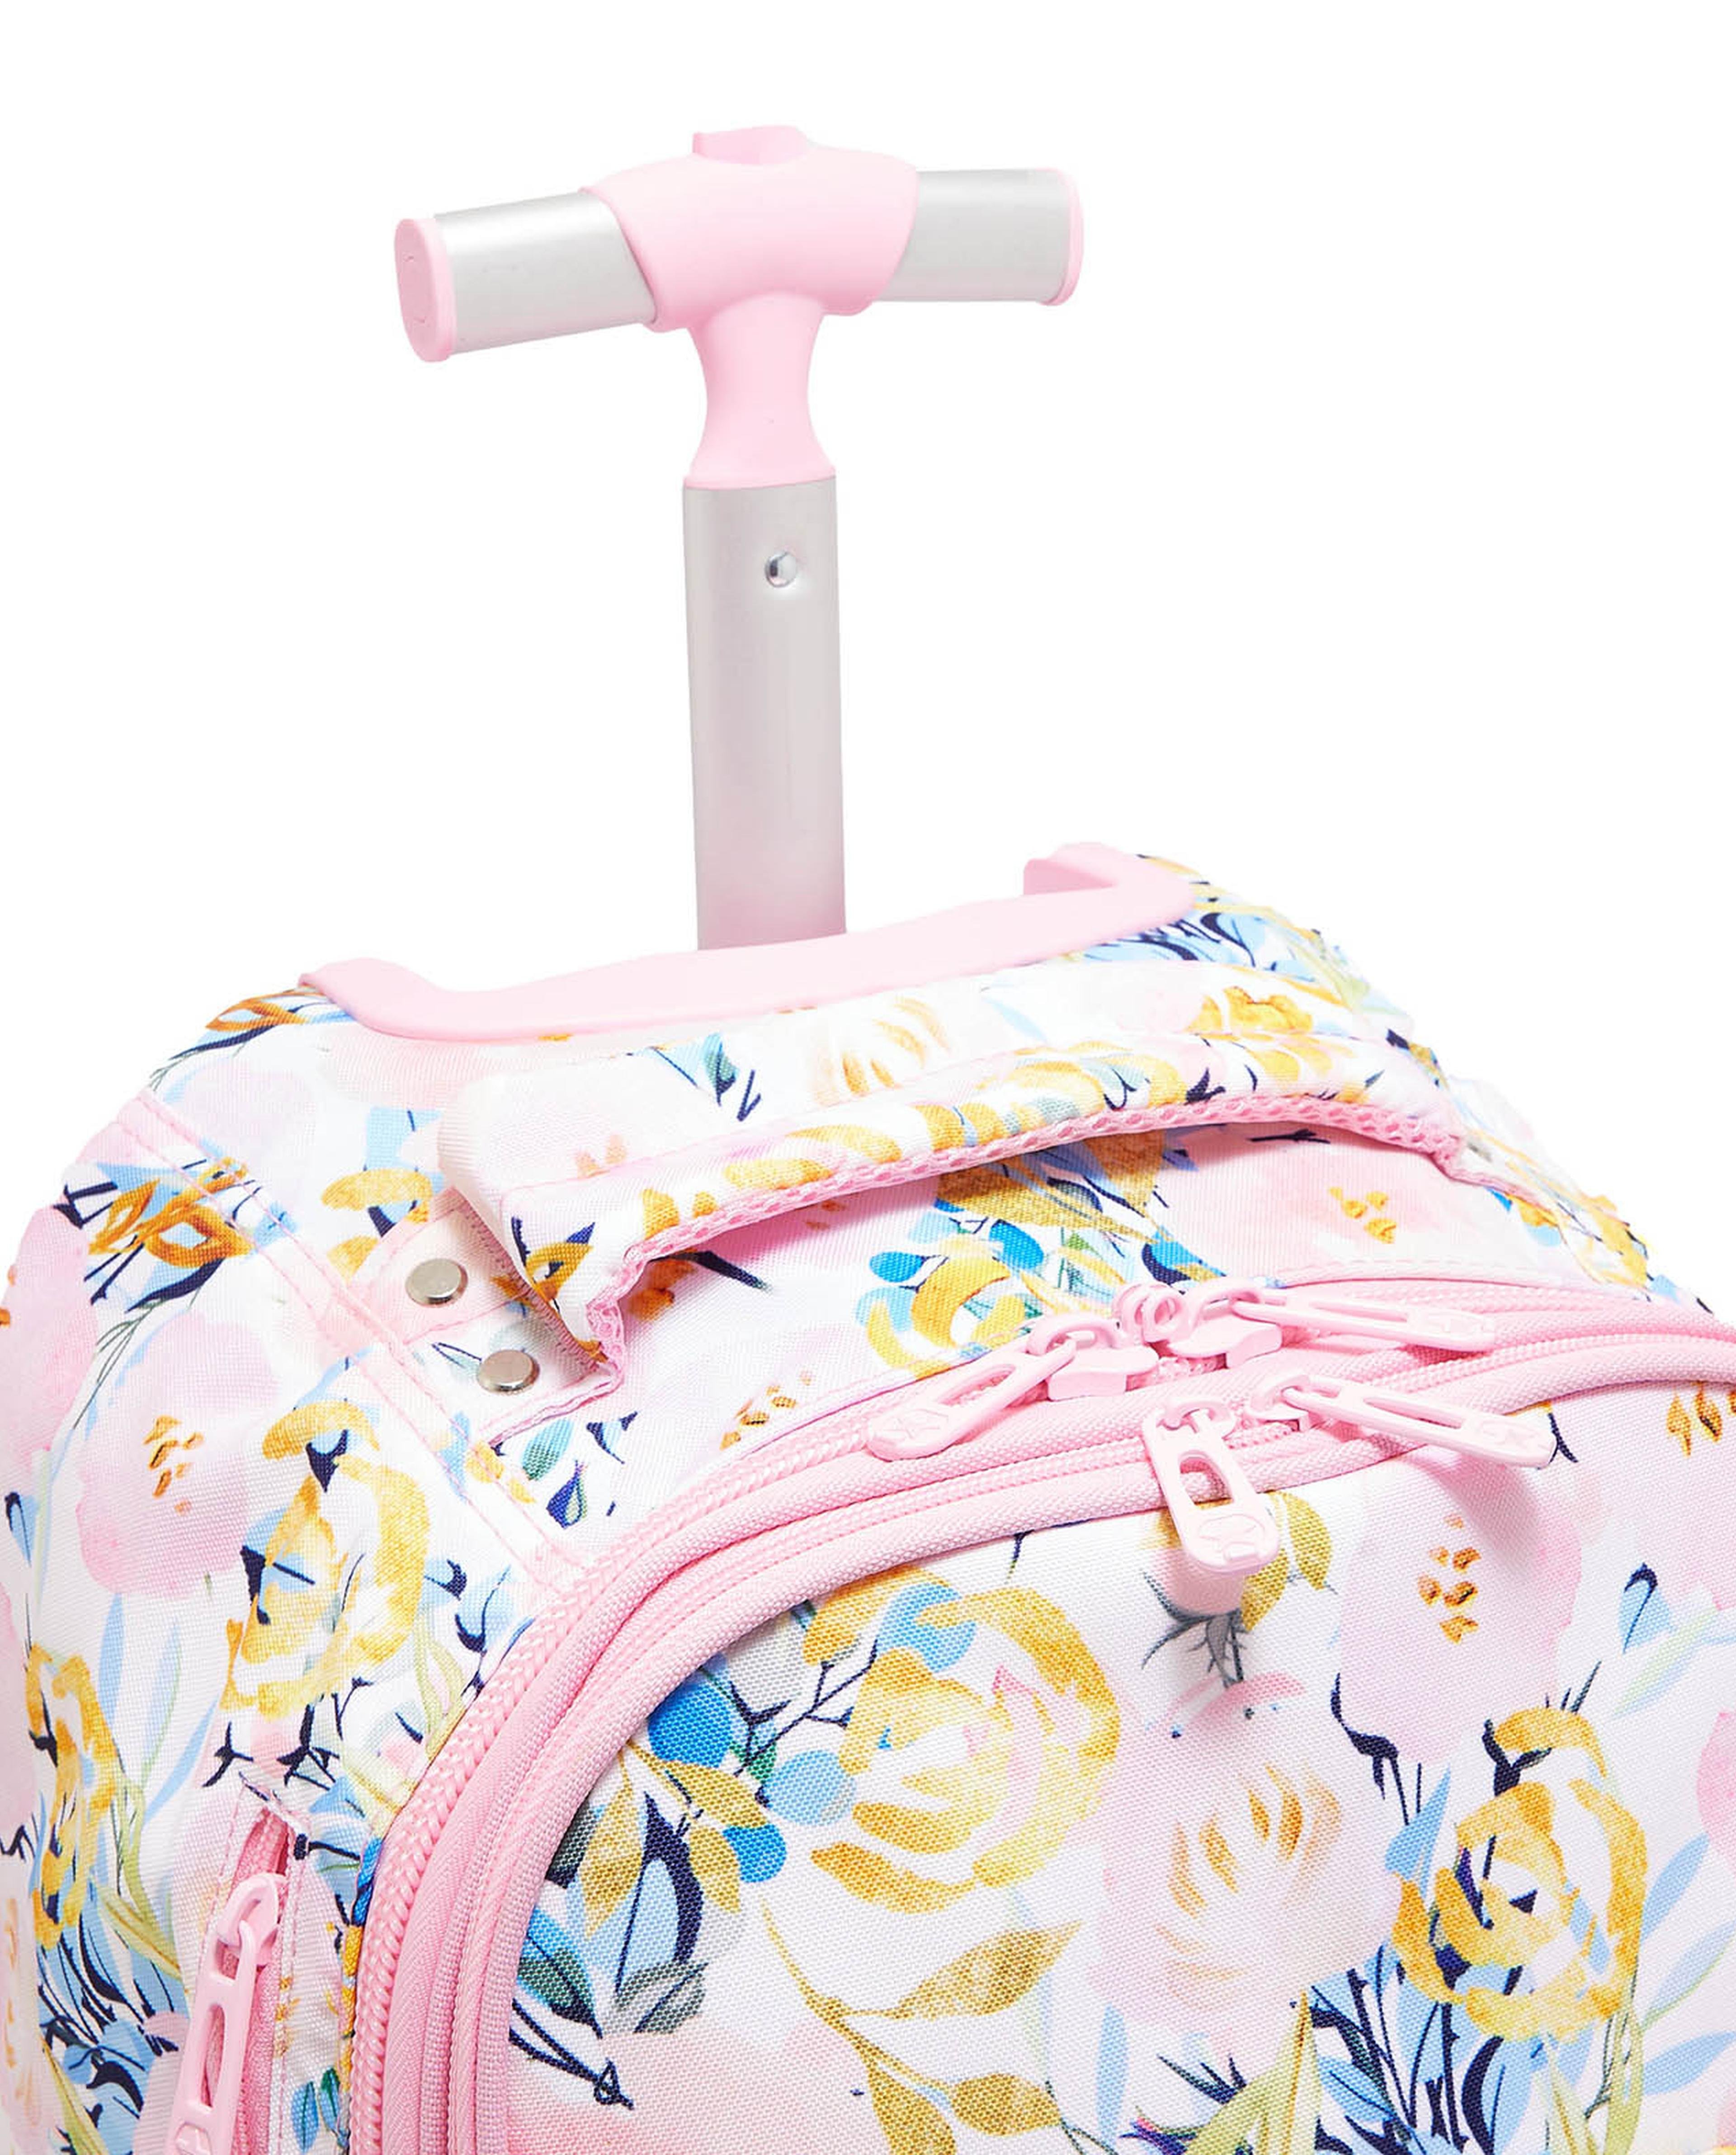 Printed Trolley Backpack with Pencil Case